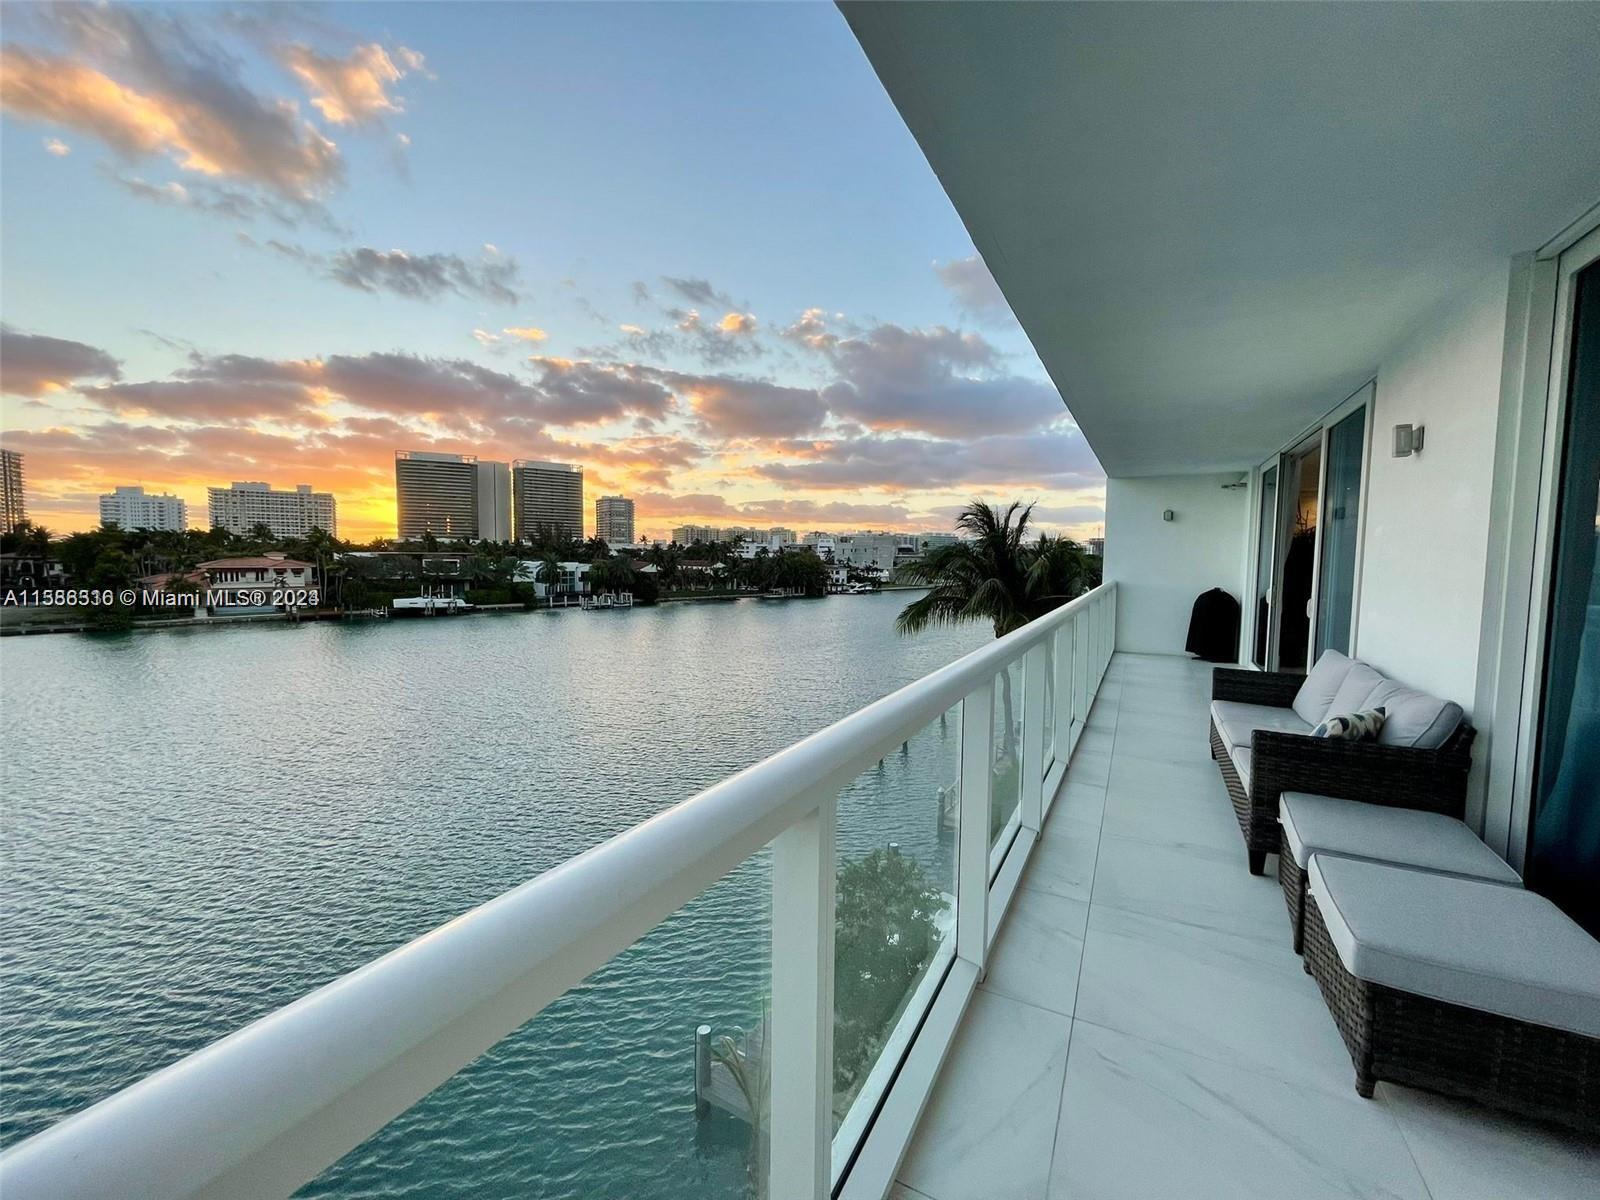 Water front view. Luxury boutique building in one of the most safe area in Miami Dade. The unit has high ceiling, tile floor in all unit, quartz countertop, Italian cabinets with Viking appliances. Great balcony to enjoy a beautiful view. The building features a bay front desk, fitness center, sauna, a waterfront barbecues, two pools, kayaks and paddle boats available, super well located in the Islands, steps away from Bal Harbor shops, restaurants, cafes and beach. Great school "A+" in the Island.